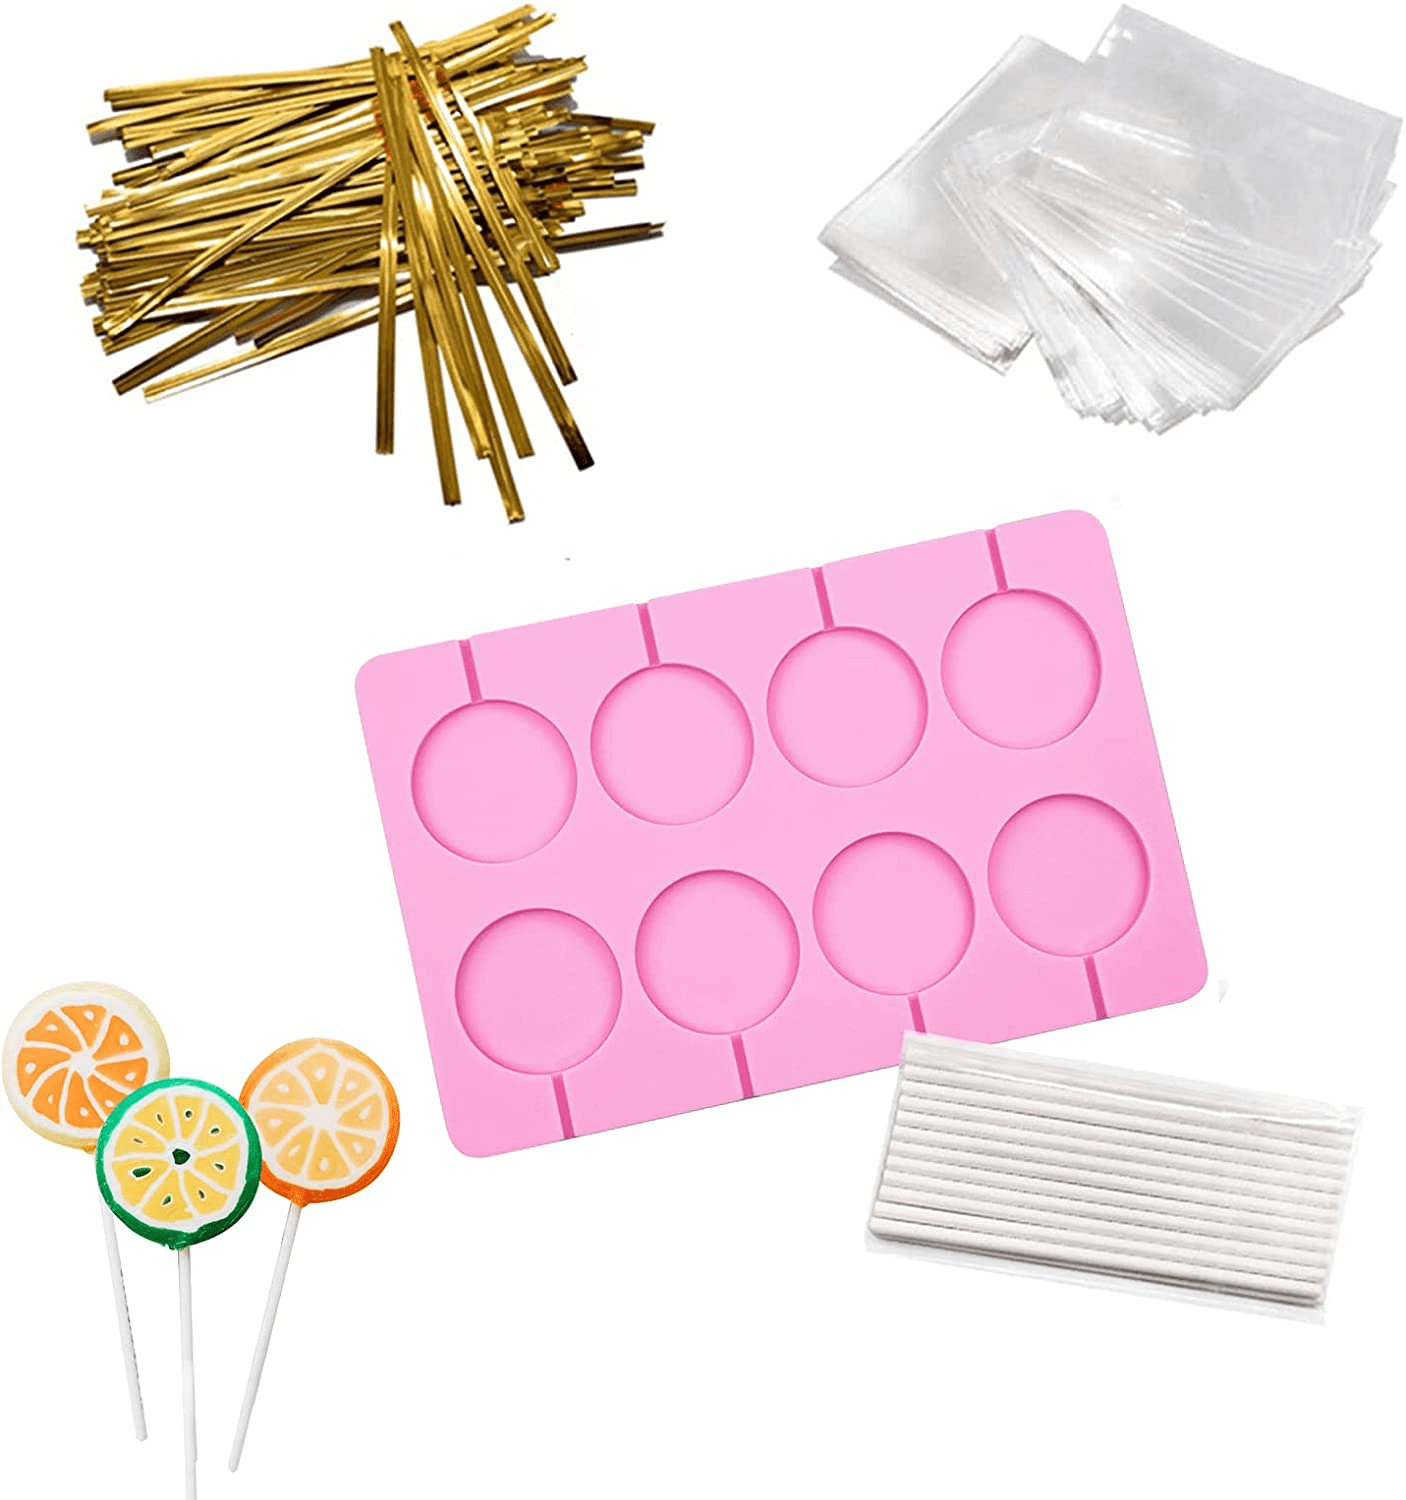 HYCSC Silicone Lollipop Molds, 8-Capacity Large Sucker Molds, Round  Chocolate Hard Candy Molds, Ice Molds, Great for Lollipop, Sucker, Hard  Candy